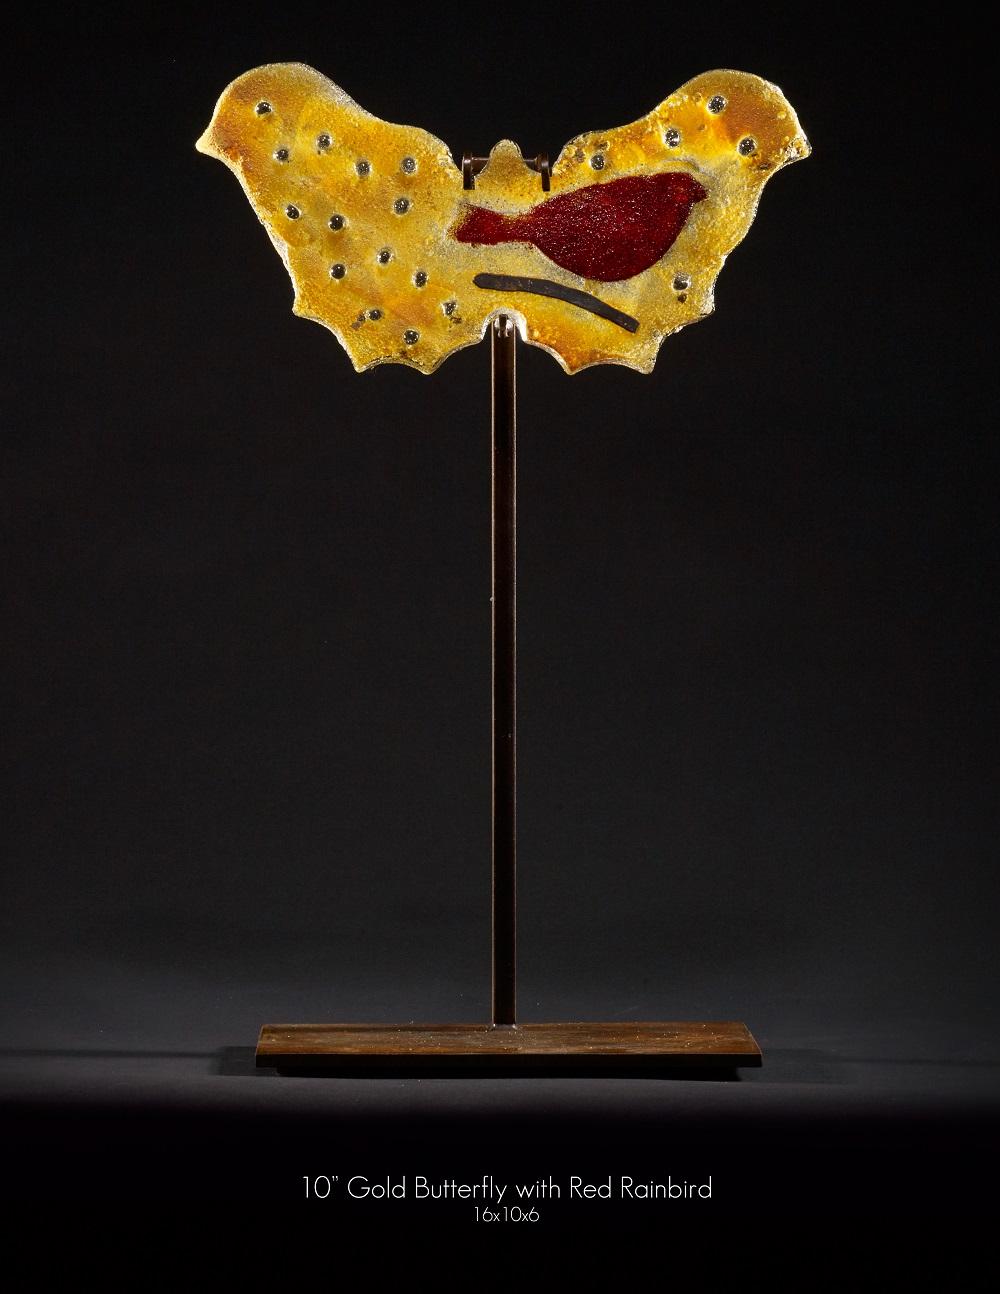 Butterfly - Gold with Red Rainbird - Sculpture by Marlene Rose